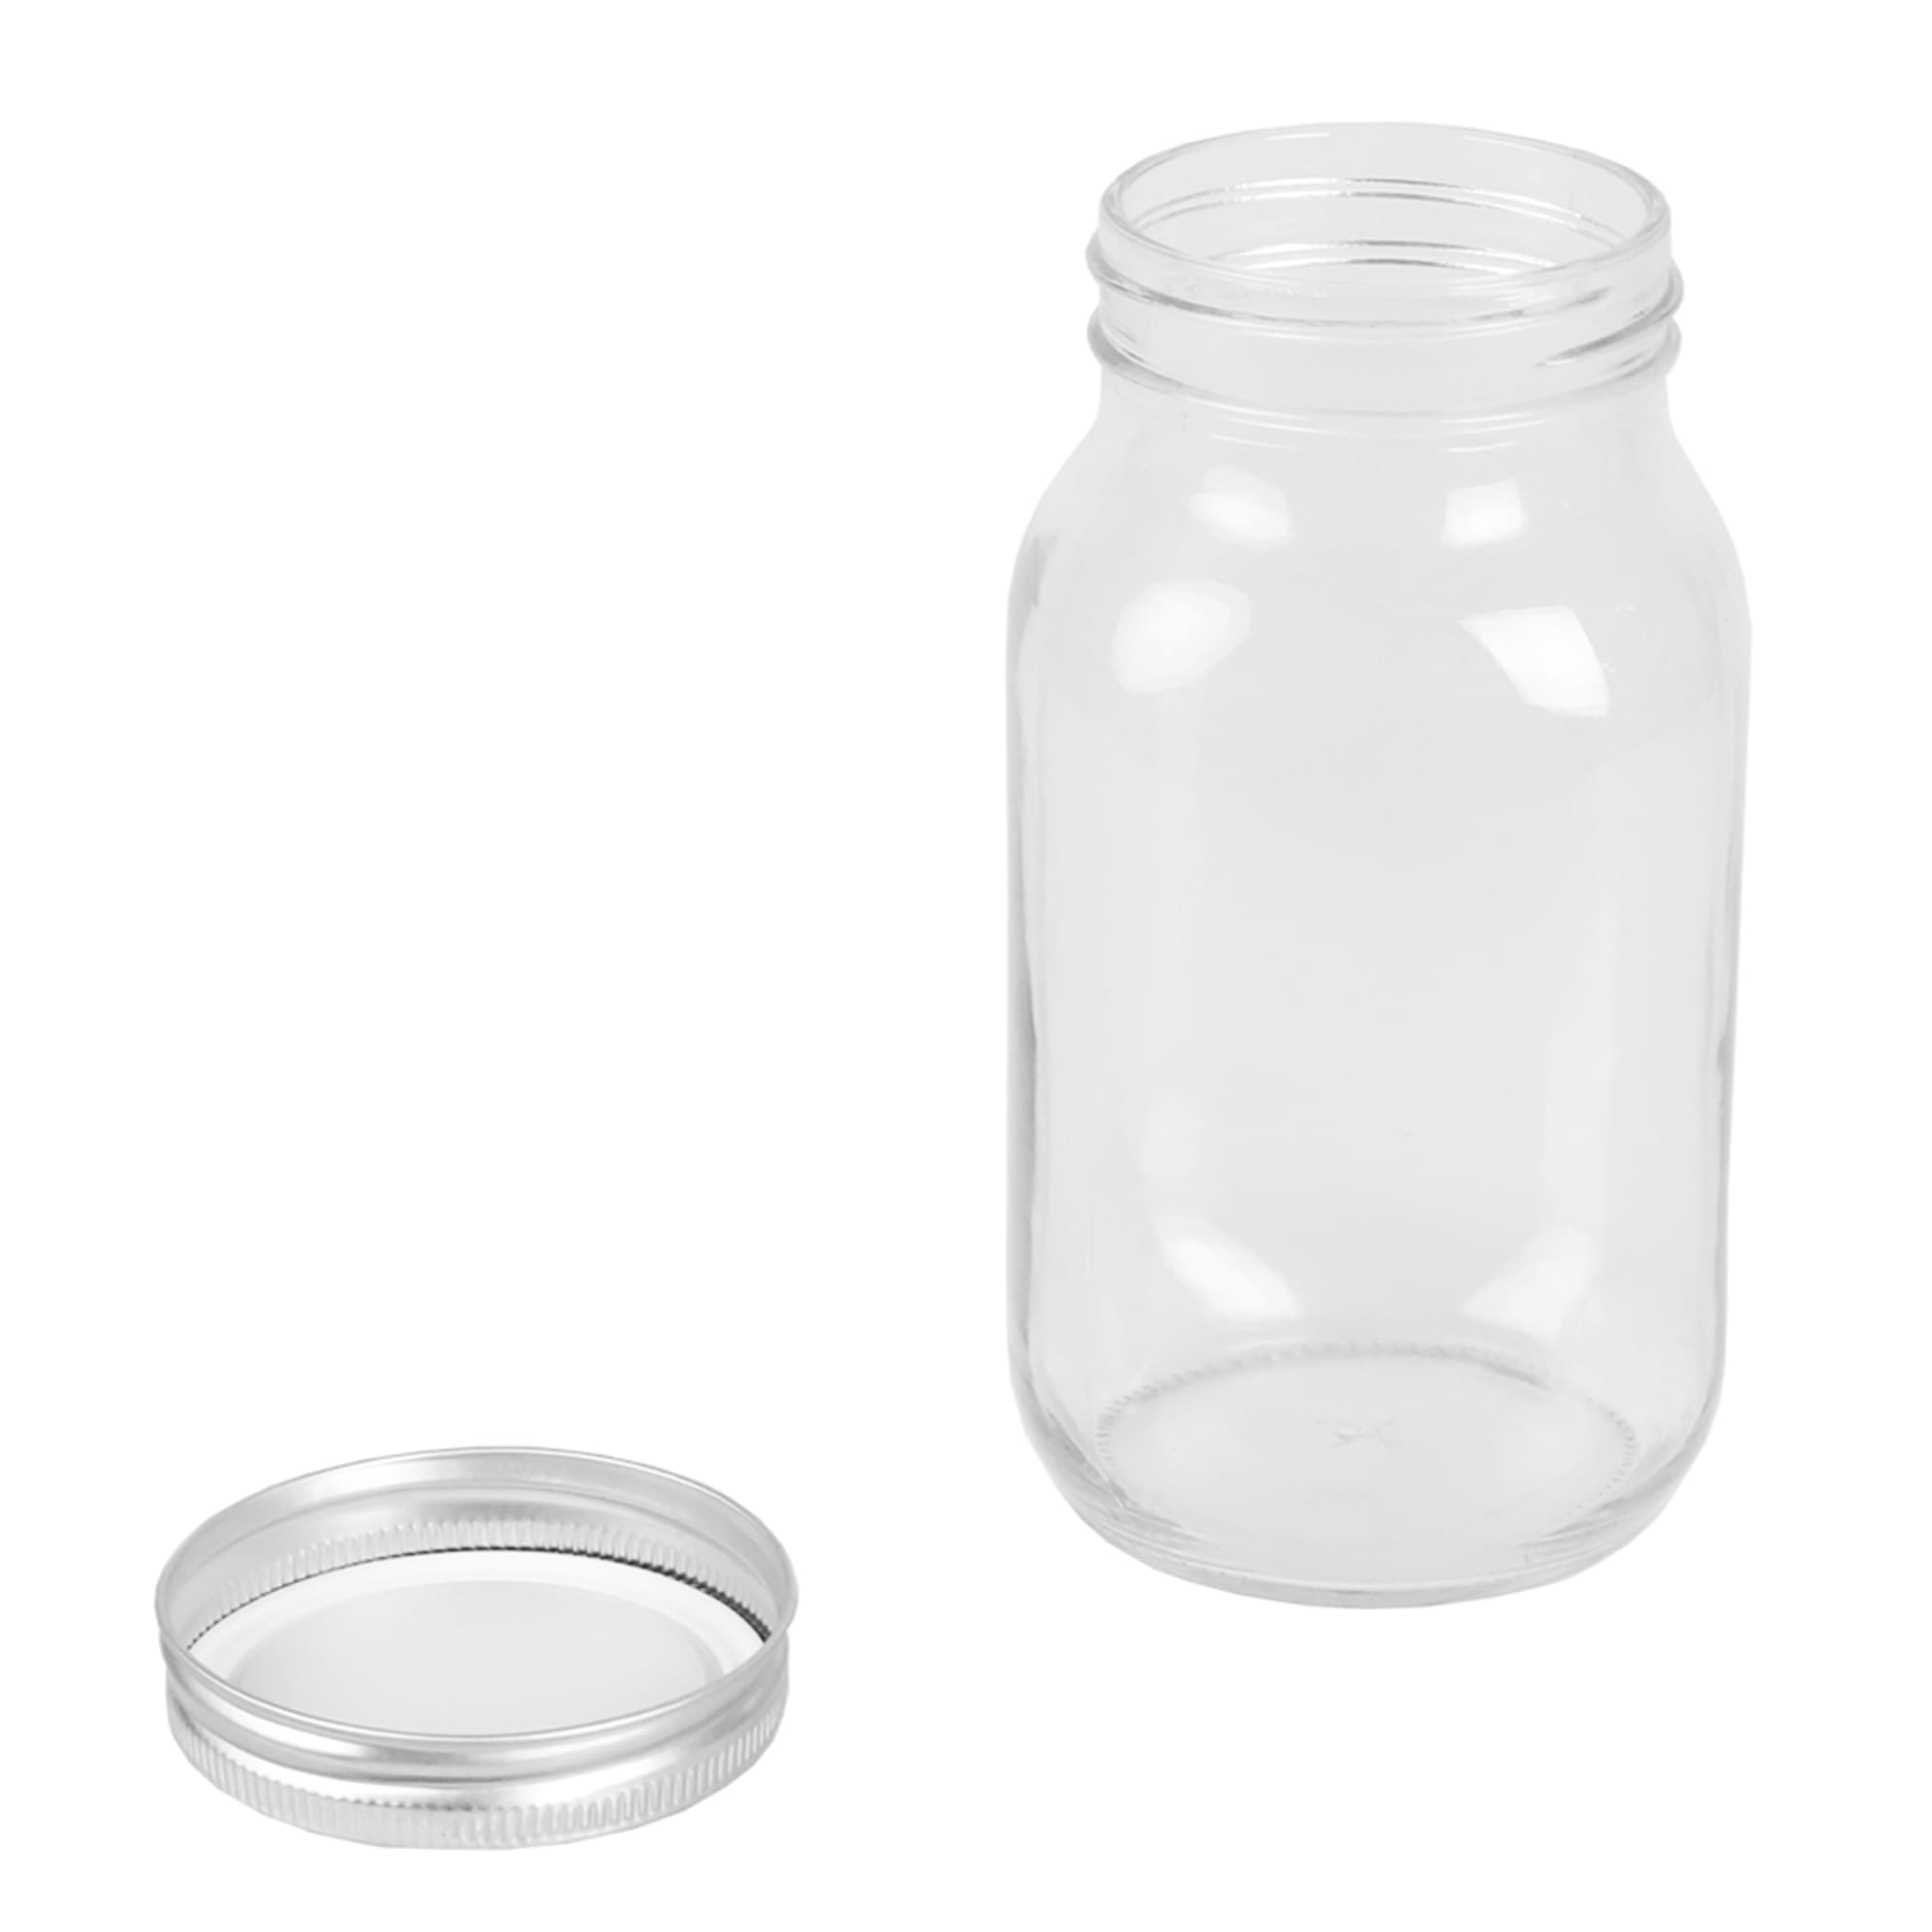 Home Basics 25 oz. Wide Mouth Clear Mason Canning Jar $2.00 EACH, CASE PACK OF 12